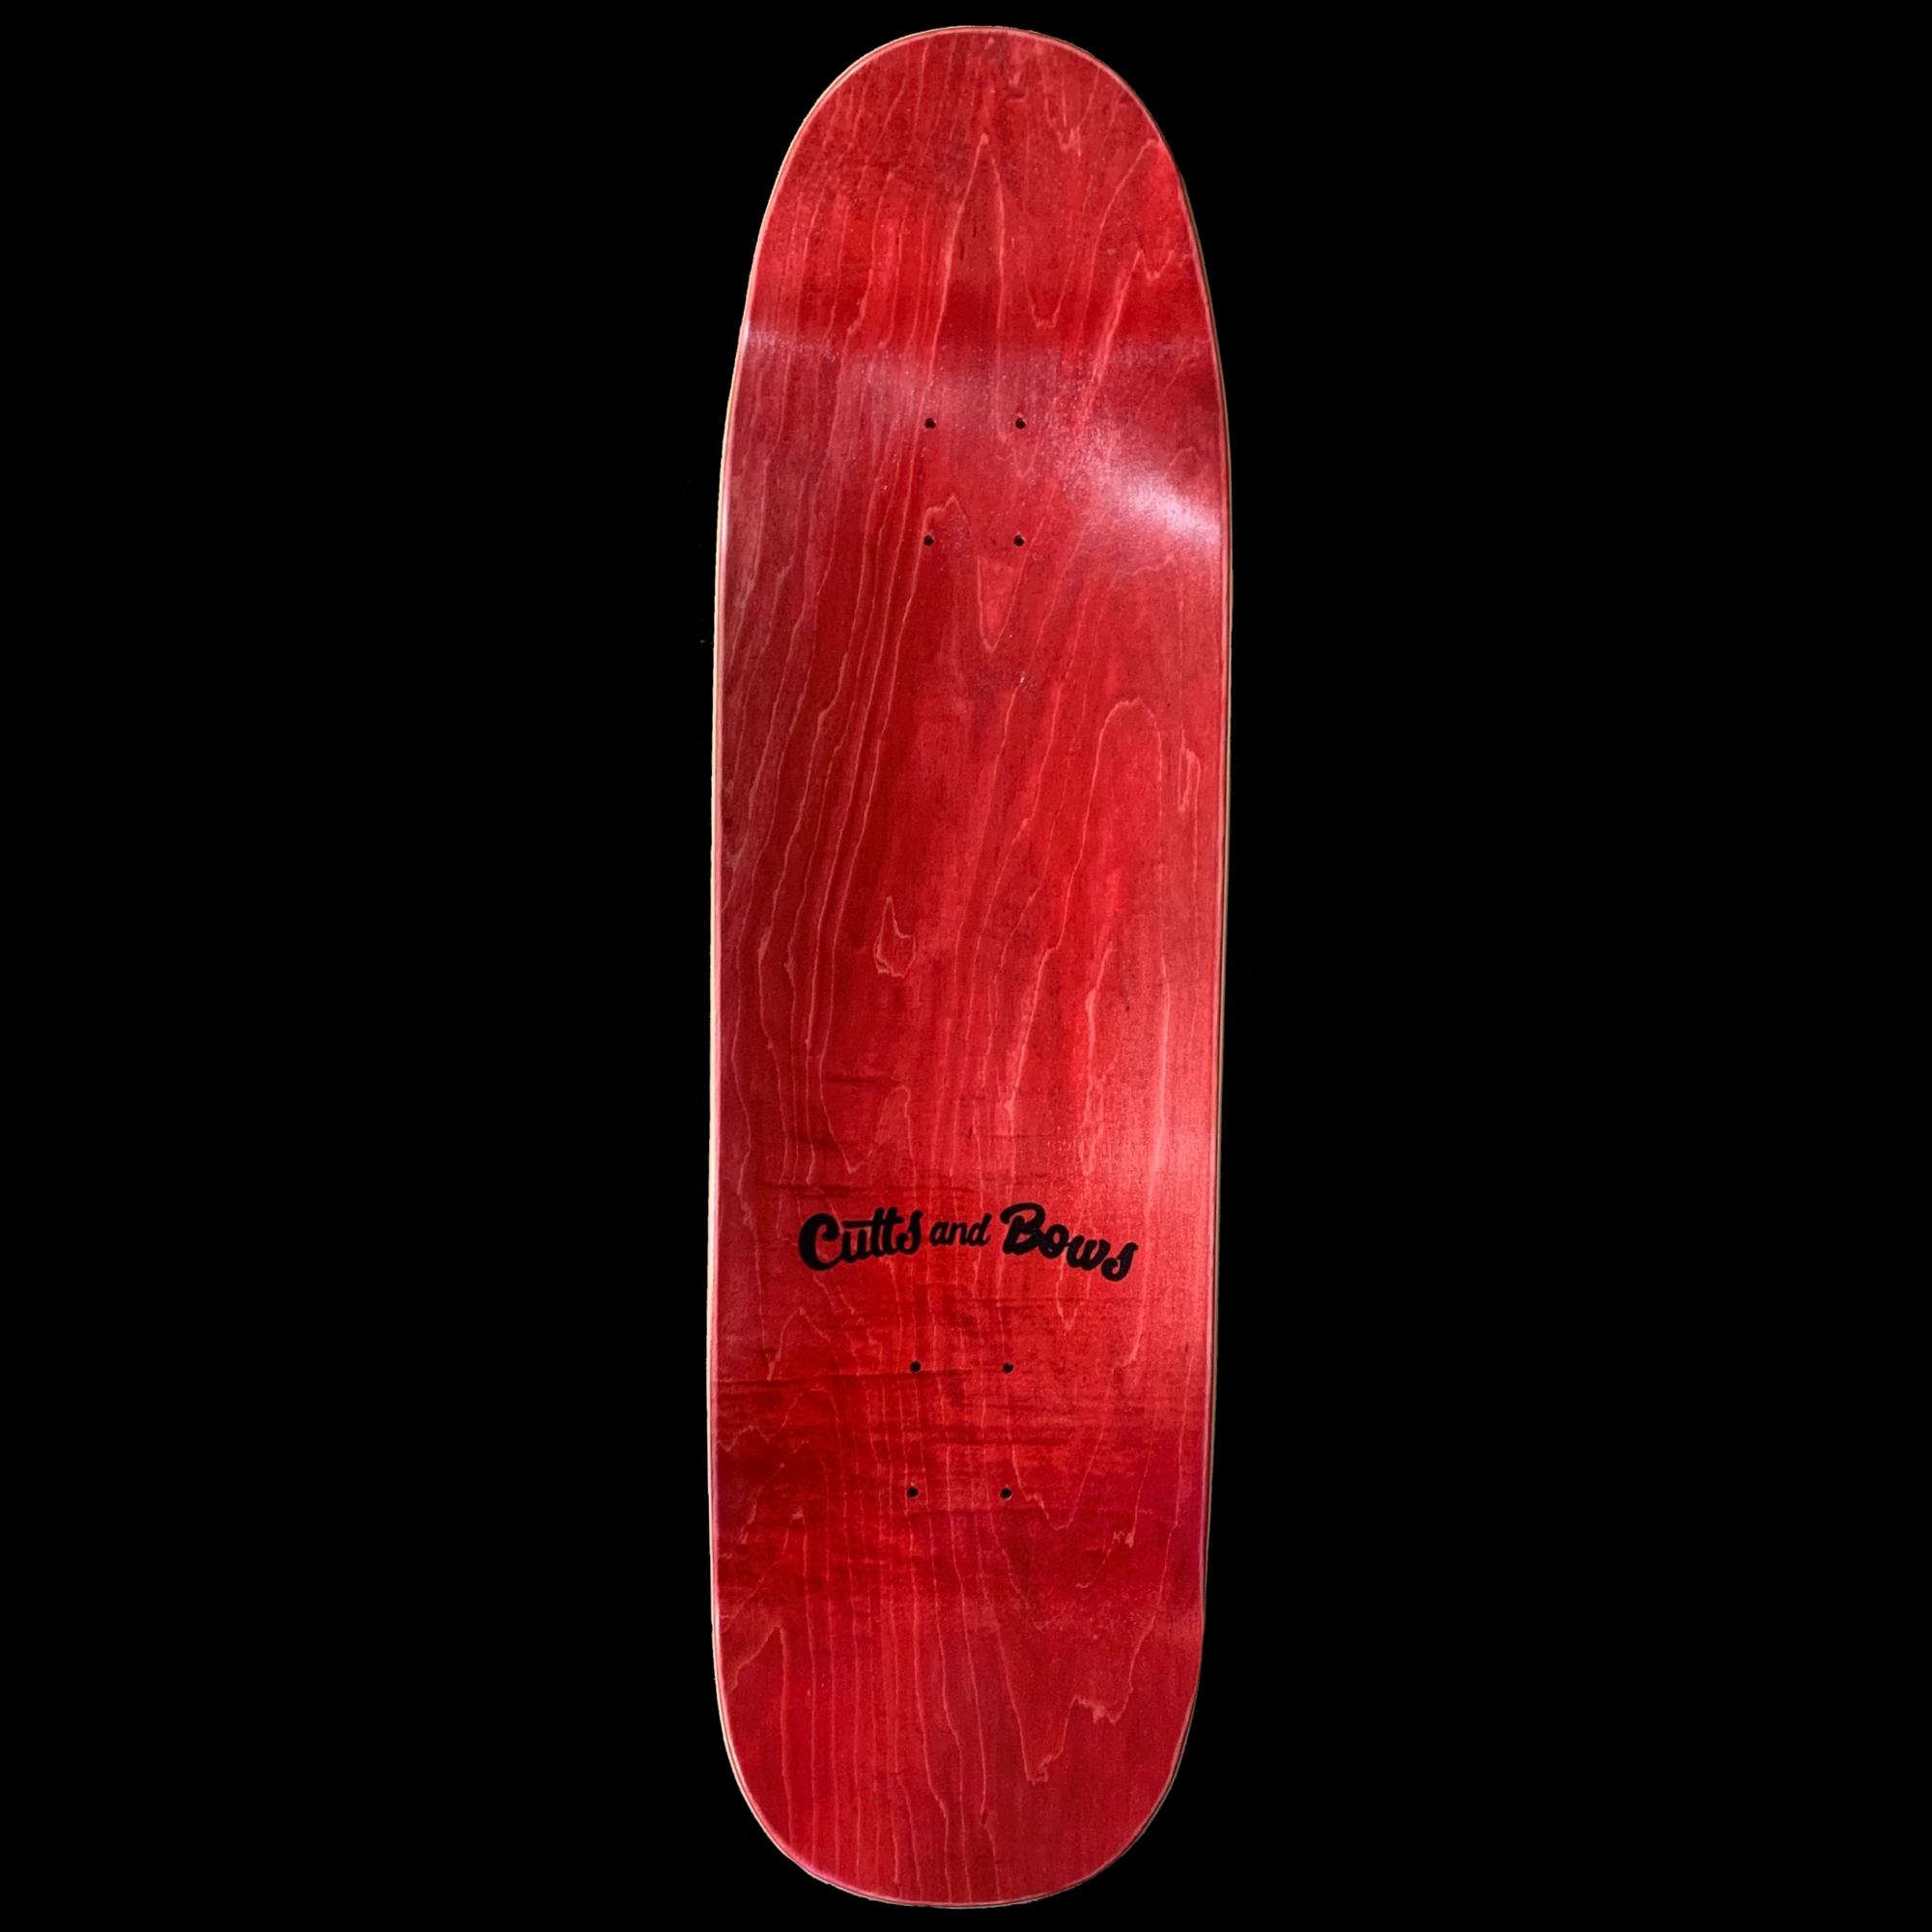 THE DRIVE X CUTTS AND BOWS DECK - TROUT RIPPER (9.25") - The Drive Skateshop